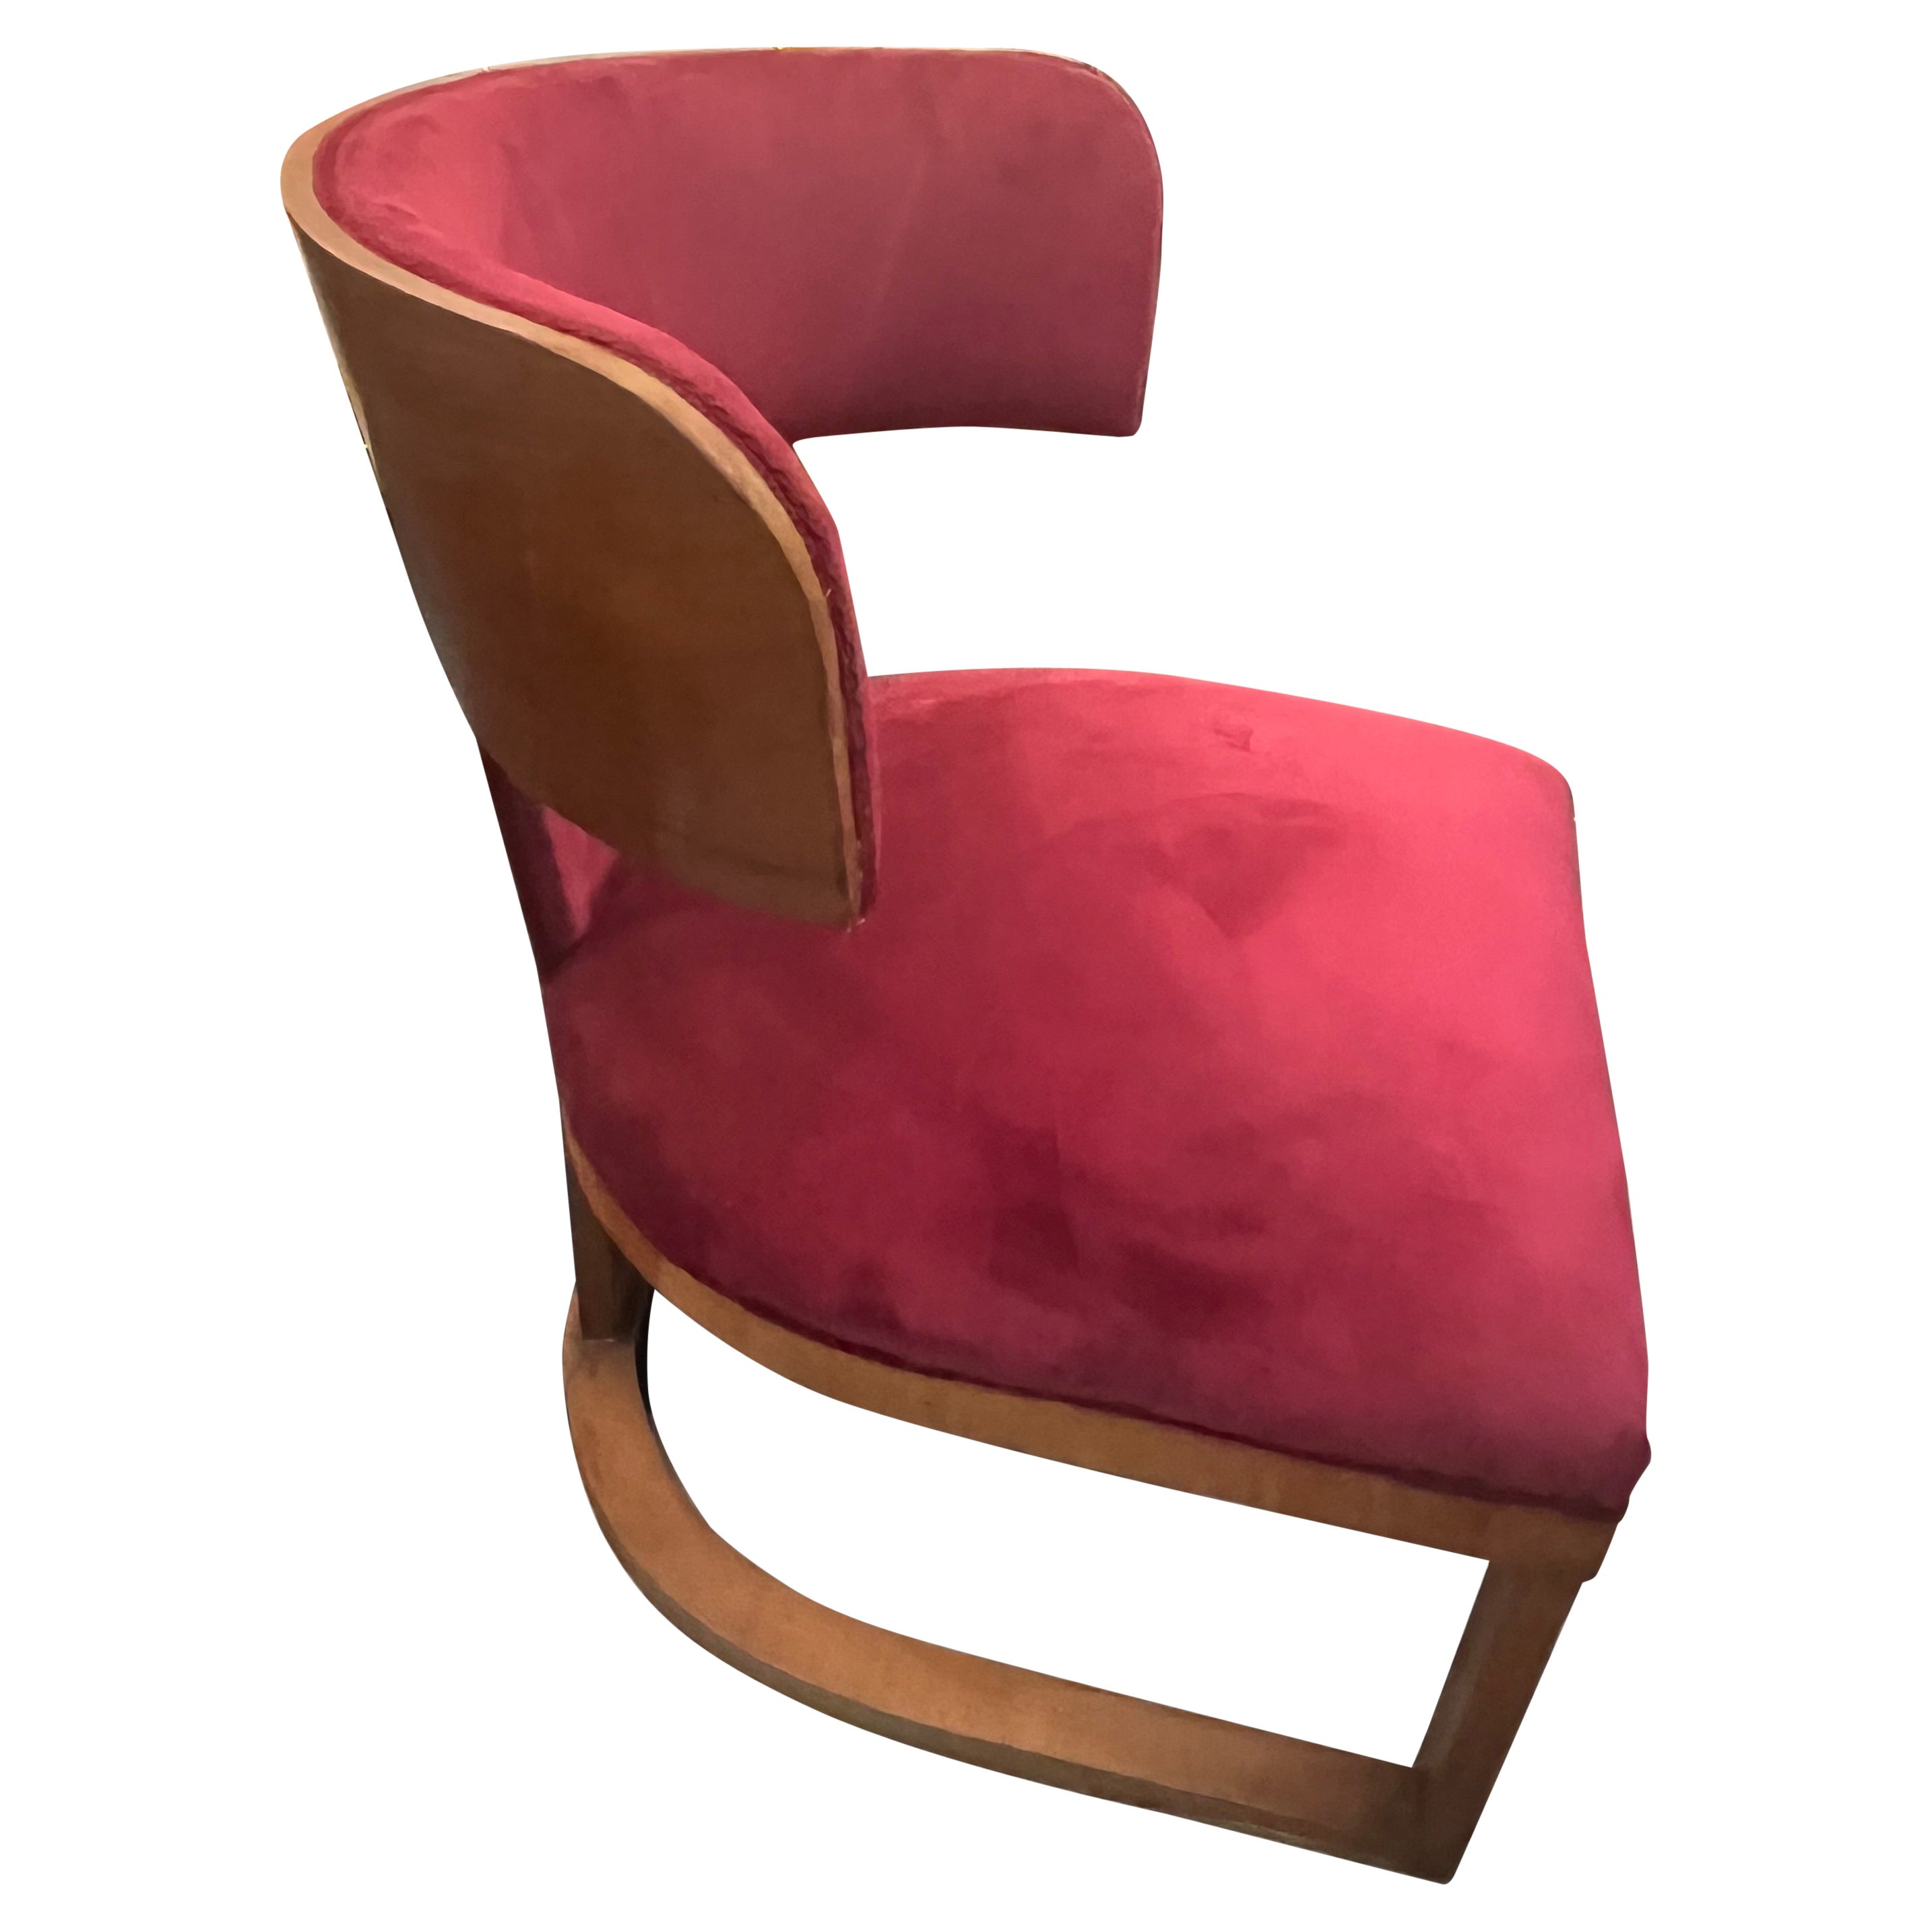 Art Deco armchair by Ernesto Lapadula 1930s made of Walnut wood and Fuchsia velvet For Sale